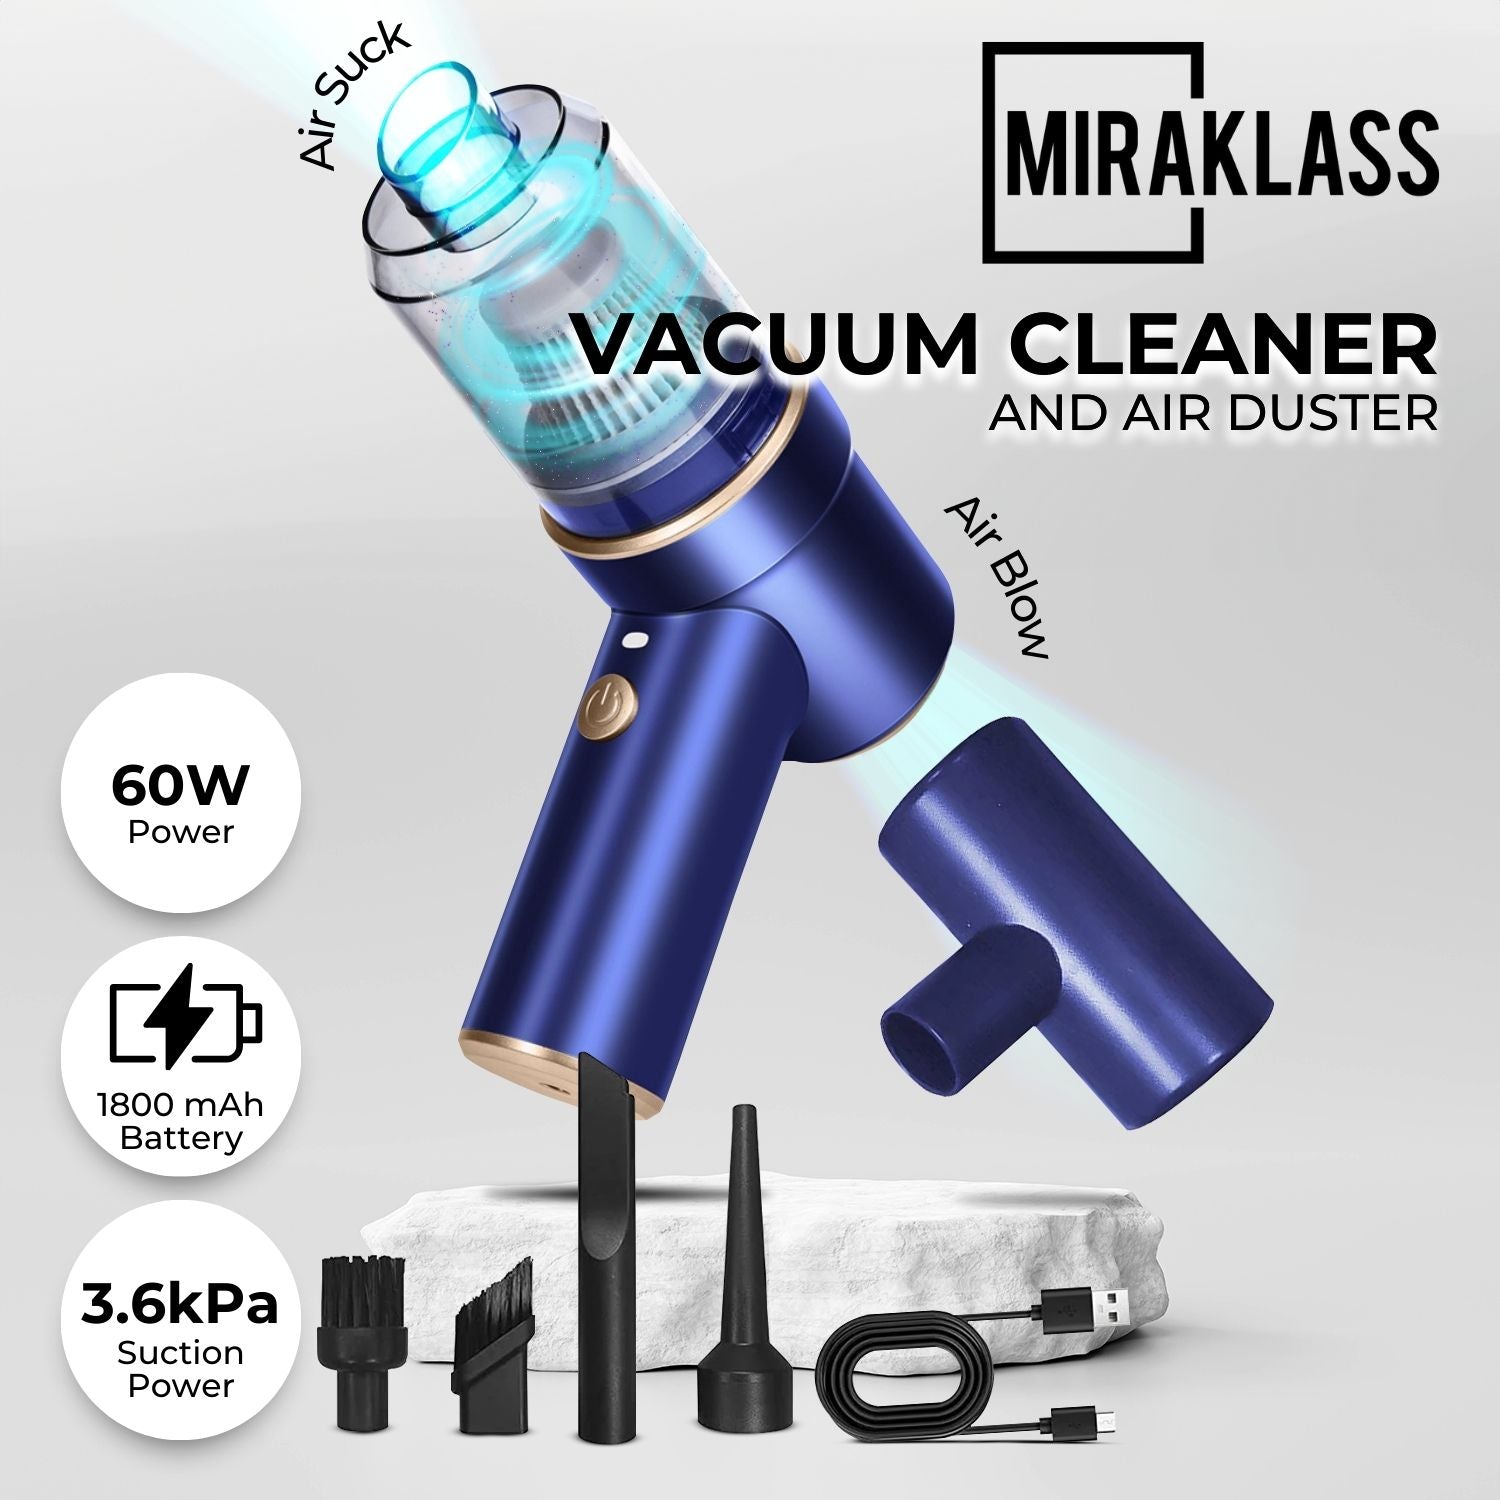 MIRAKLASS 45000RPM 7.4V Rechargeable Cordless Air Duster and Car Vacuum Cleaner (Navy Blue)